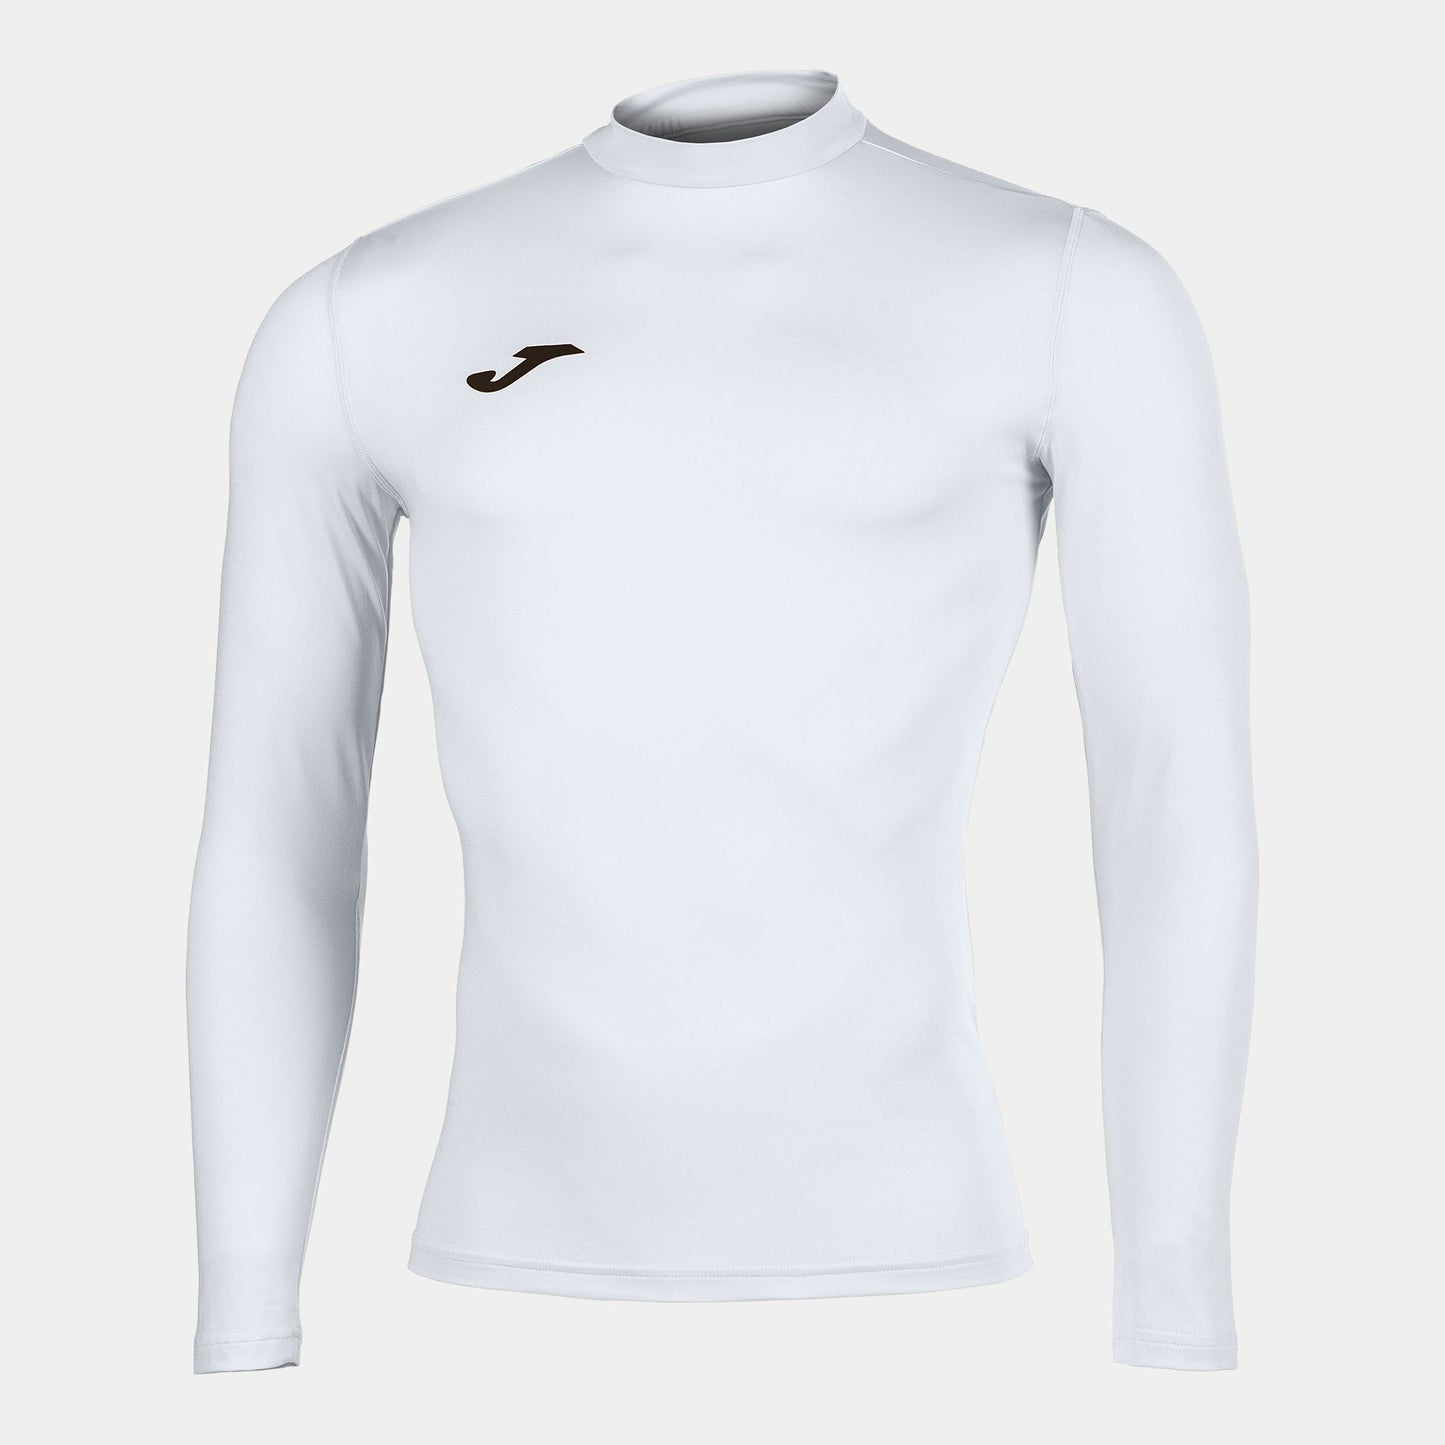 Joma Brama Baselayer Long Sleeve, available in Joma Canada Store. Joma is shipping in Canada. For club offers contact us.